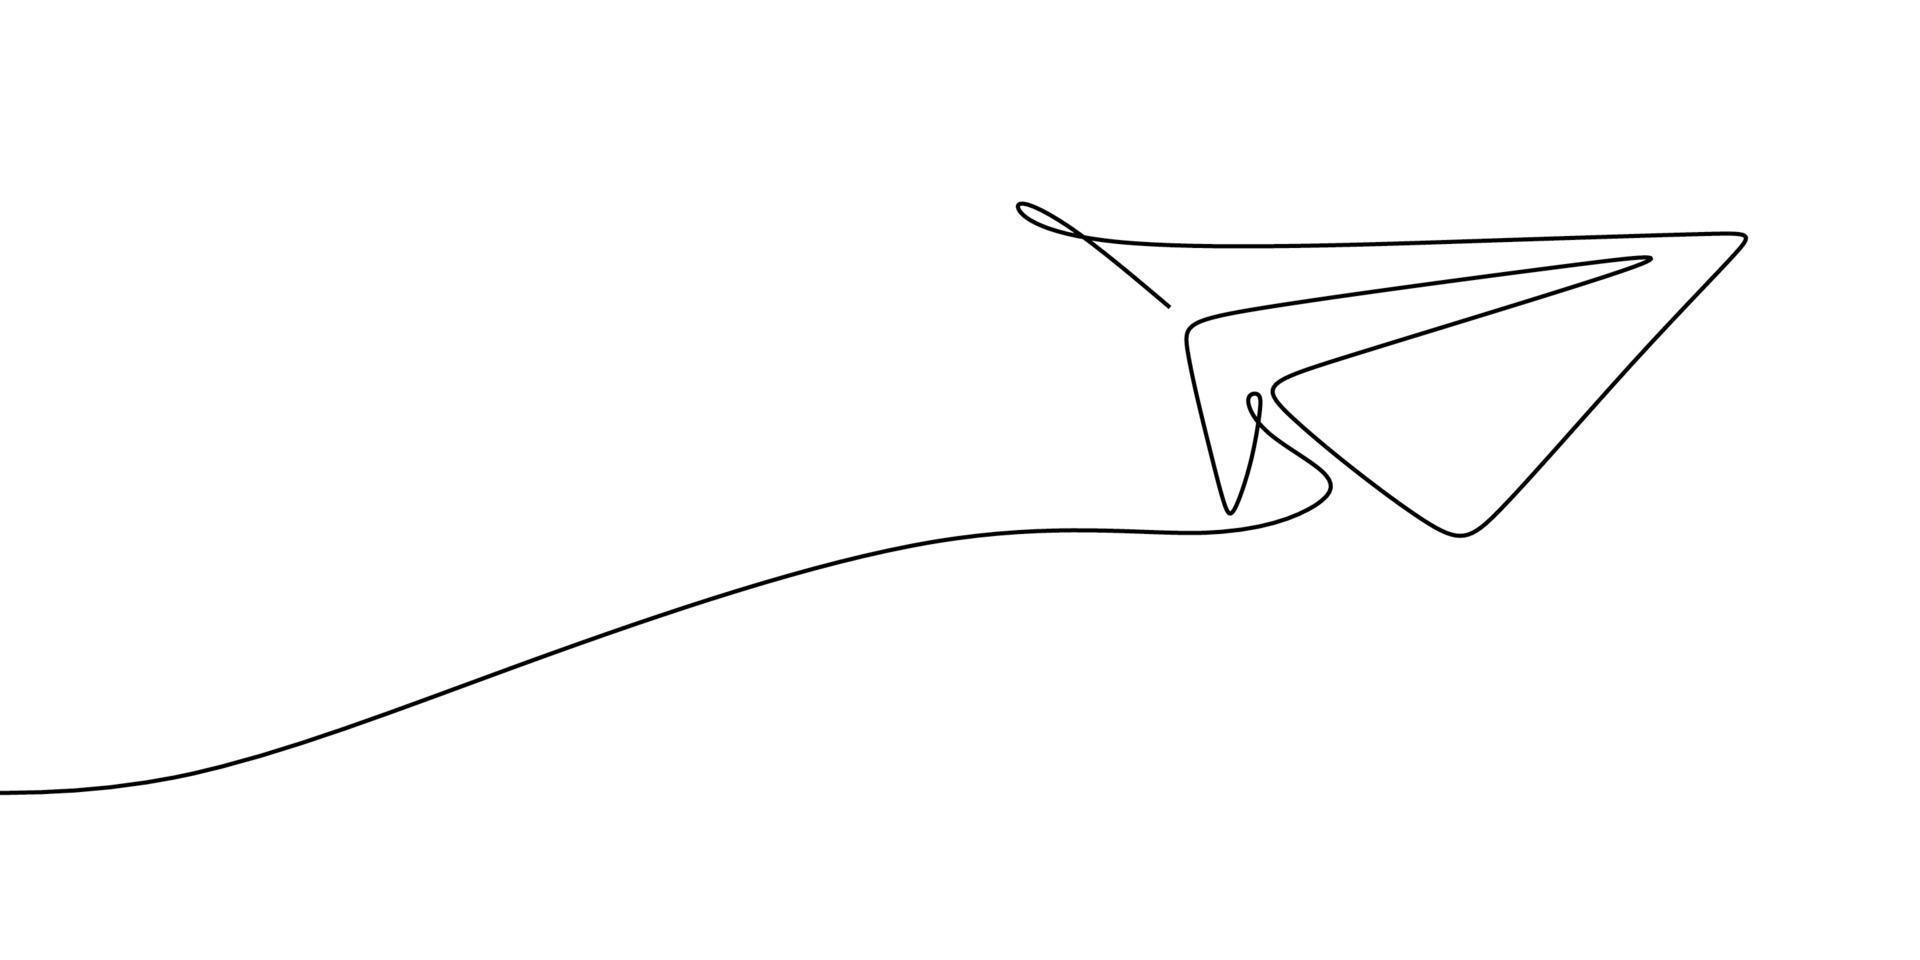 Paper plane drawing vector using continuous single one line art style isolated on white background.